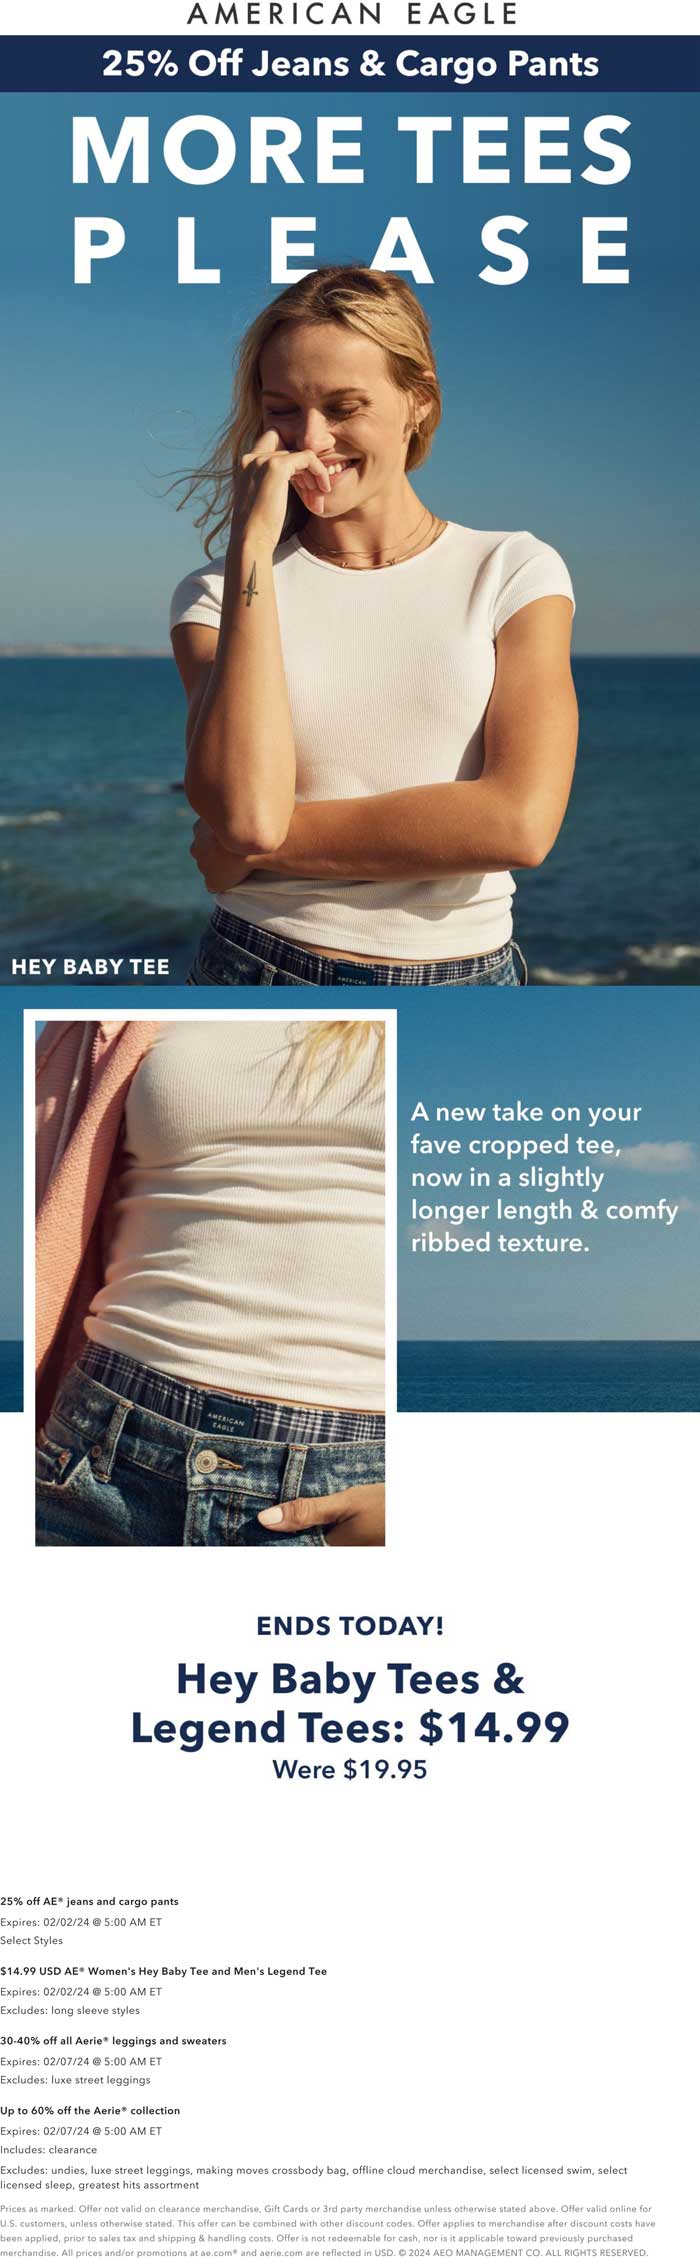 25% off jeans & cargo pants today at American Eagle #americaneagle